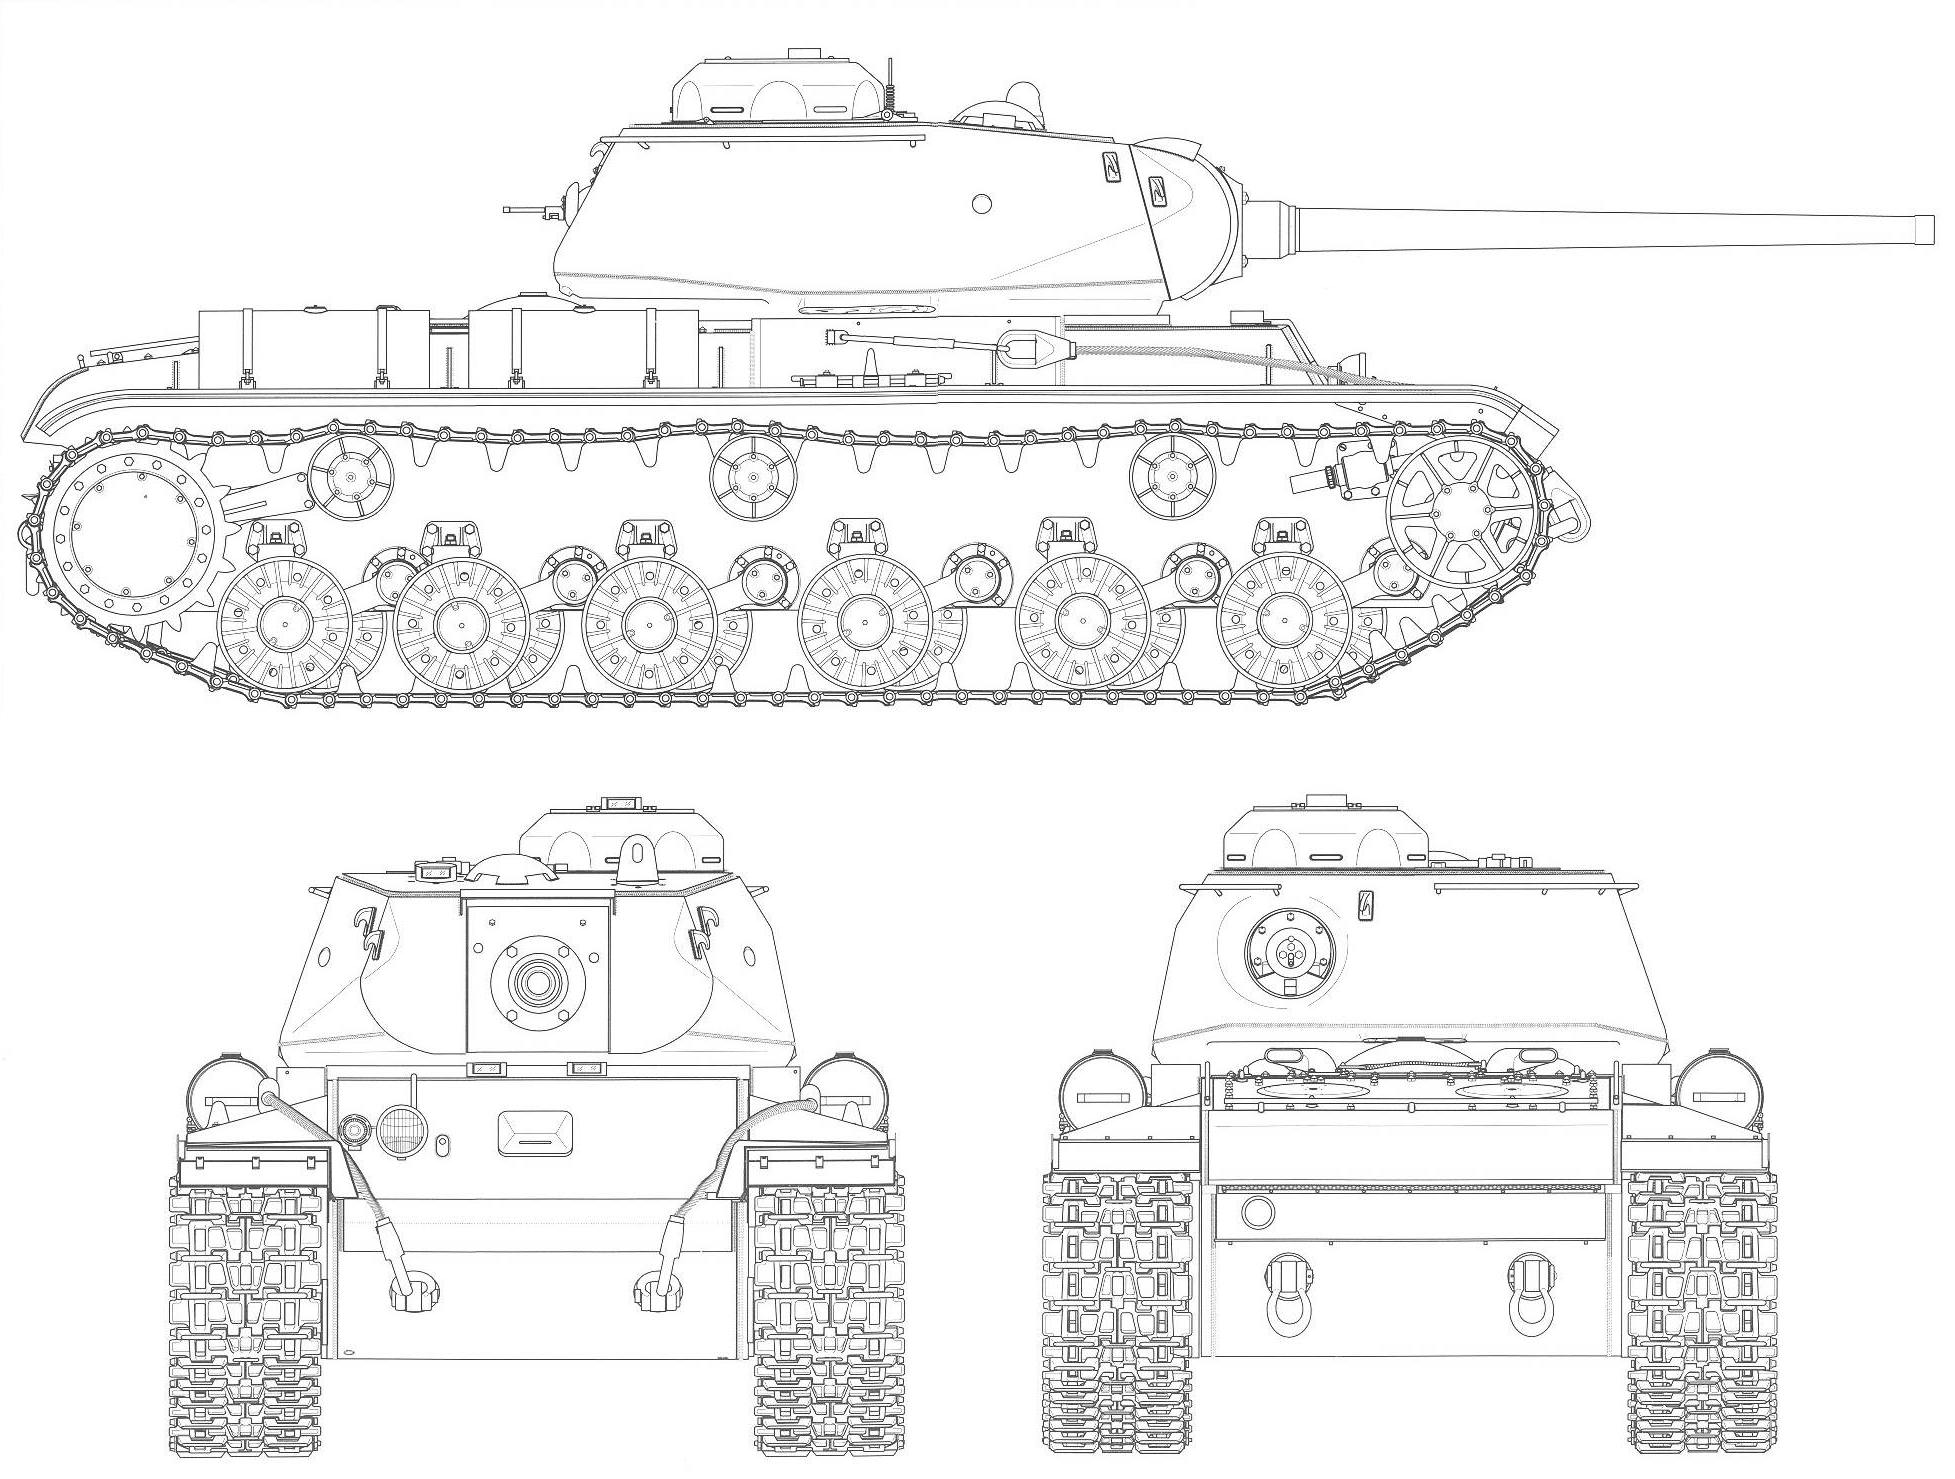 Technical drawing of a KV-85